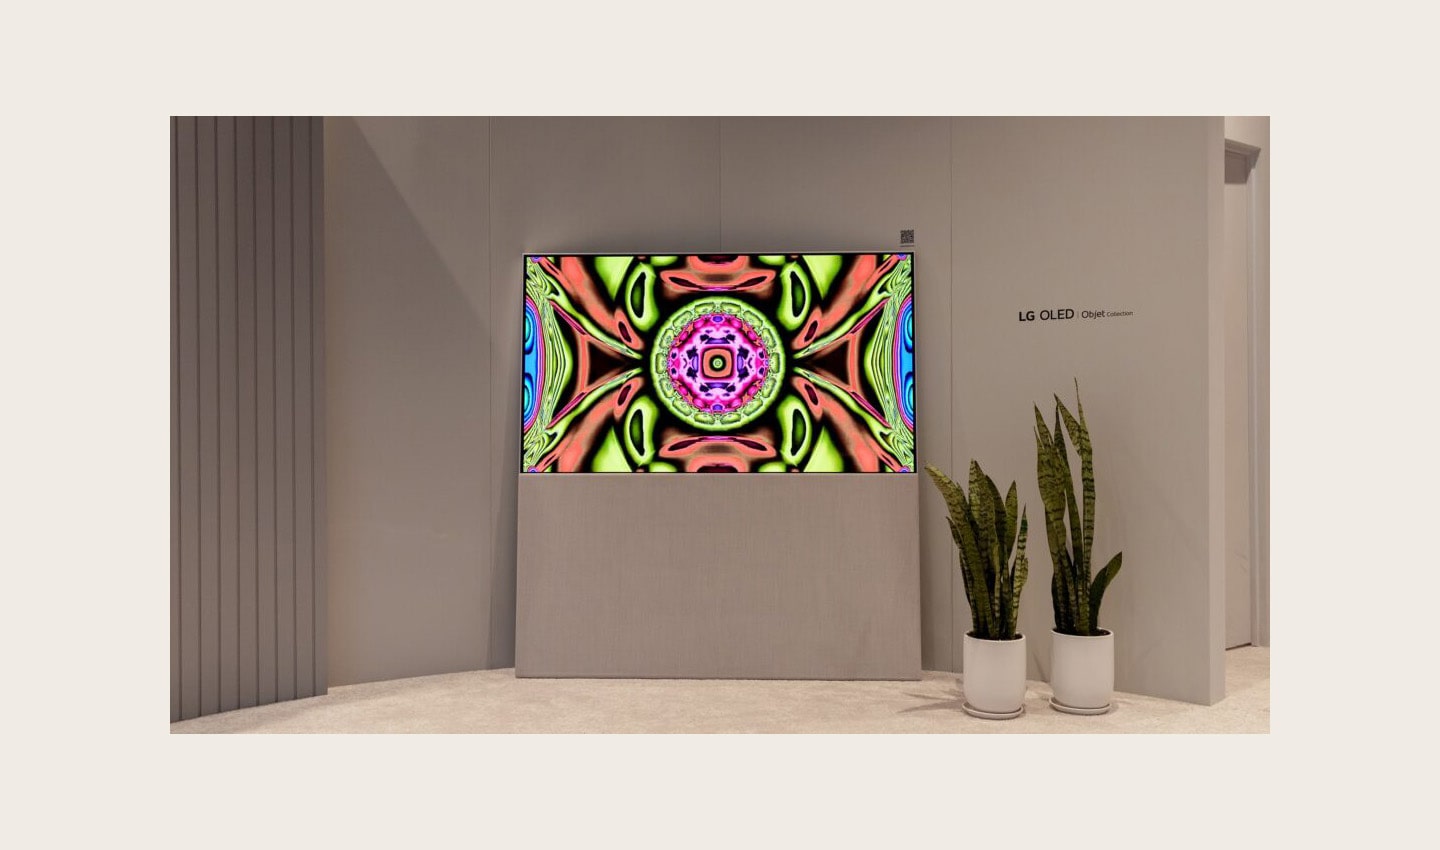 Kevin McCoy's artwork displayed on LG OLED TV at the Frieze New York 2022 art fair in Manhattan